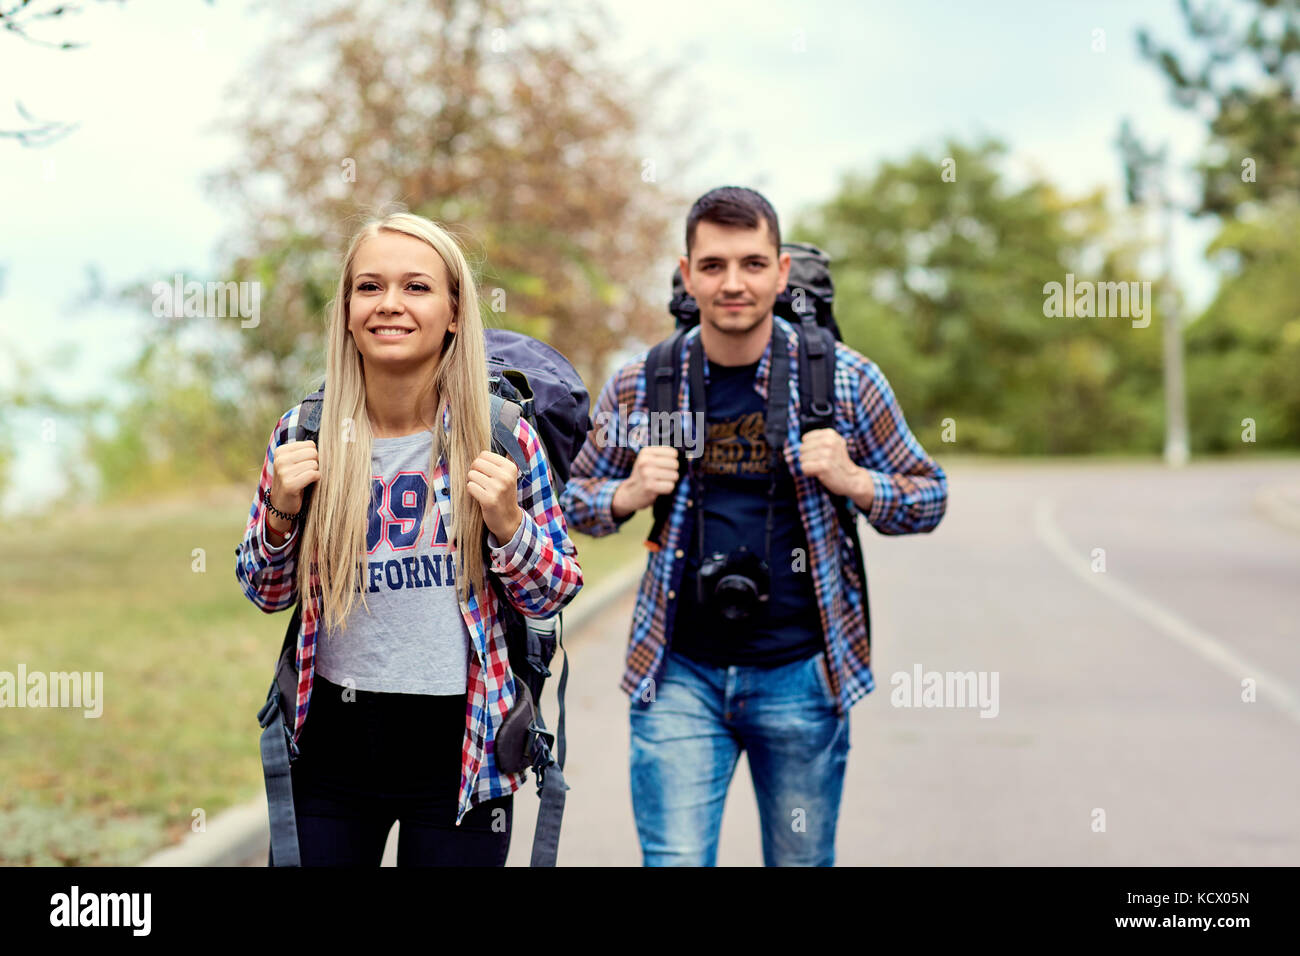 A young couple of tourists hikers in a hike on the road Stock Photo